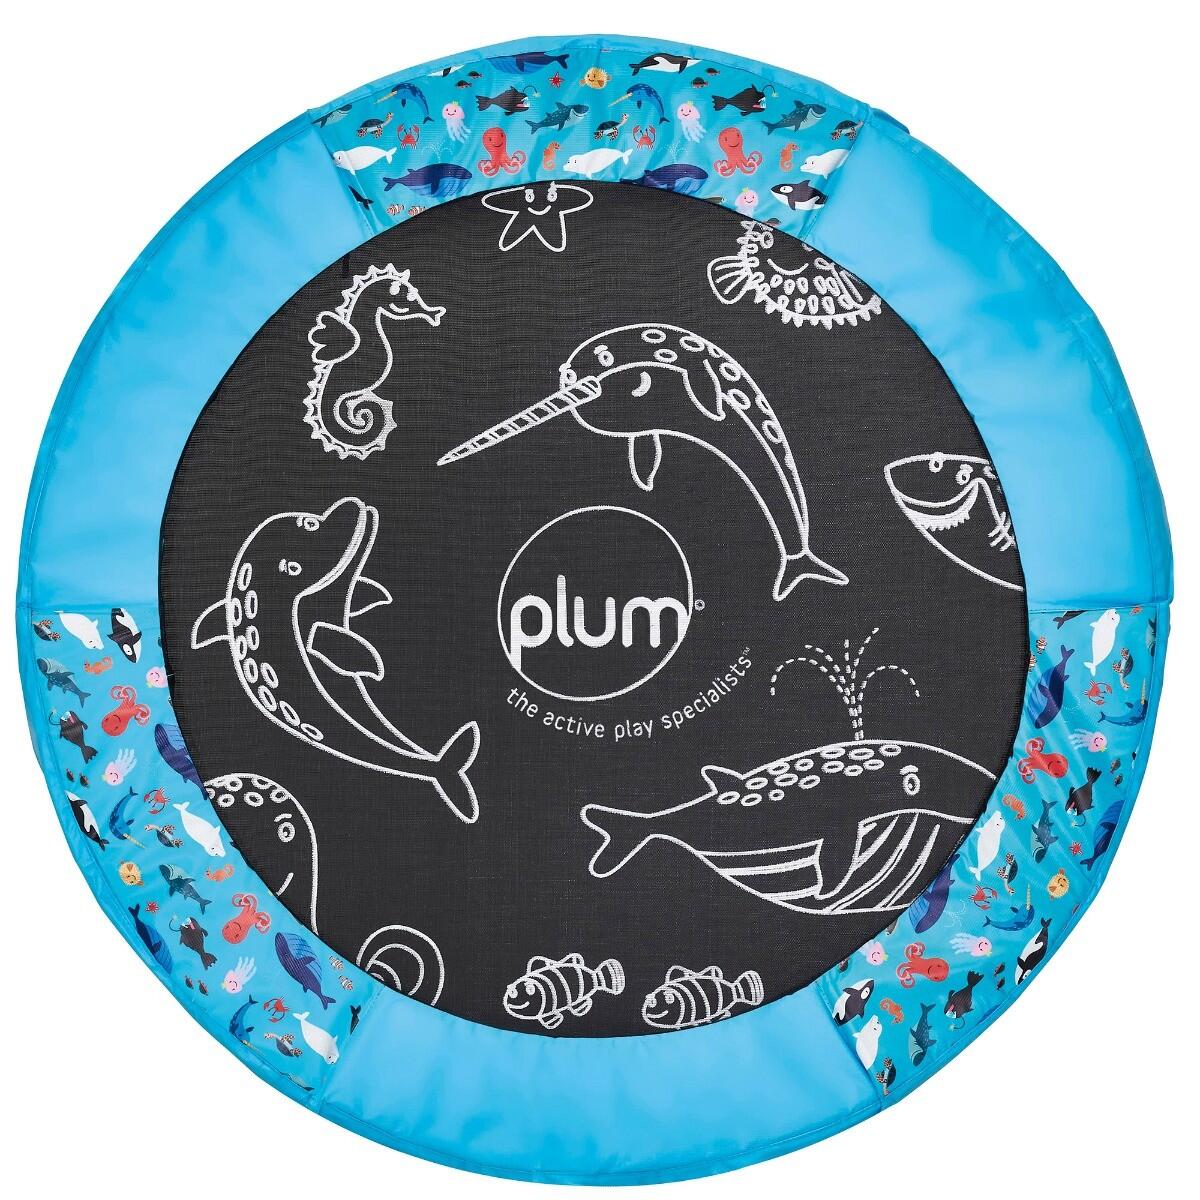 Plum 4.5ft Junior Ocean Trampoline and Enclosure with Sounds 4/5